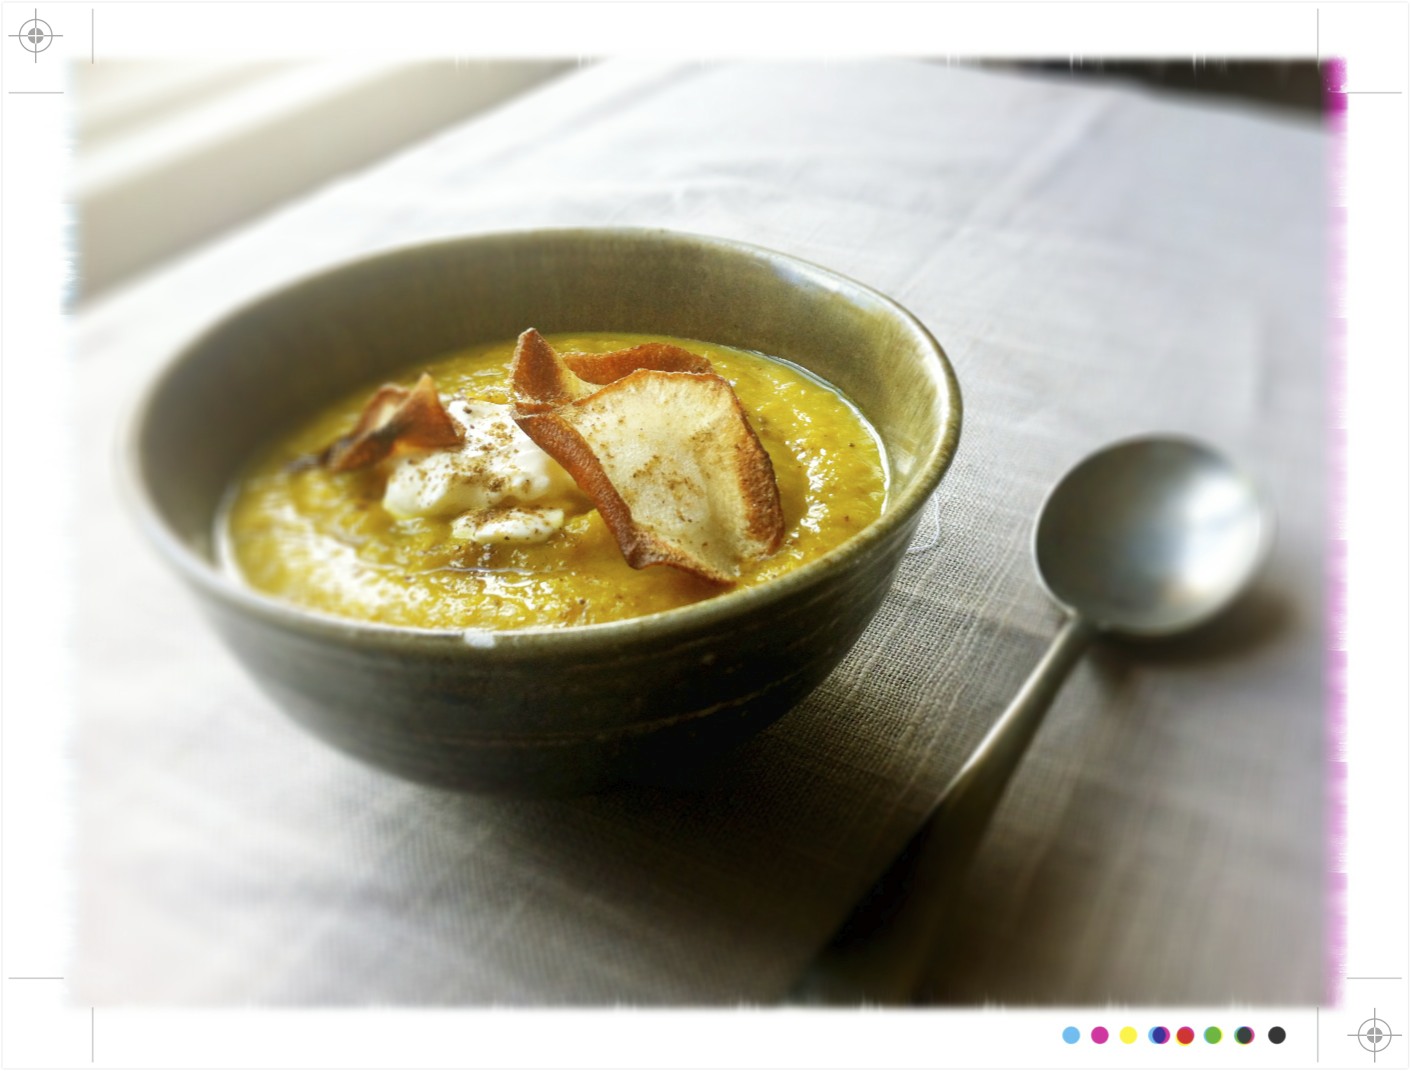 Toast: Curried Parsnip Soup